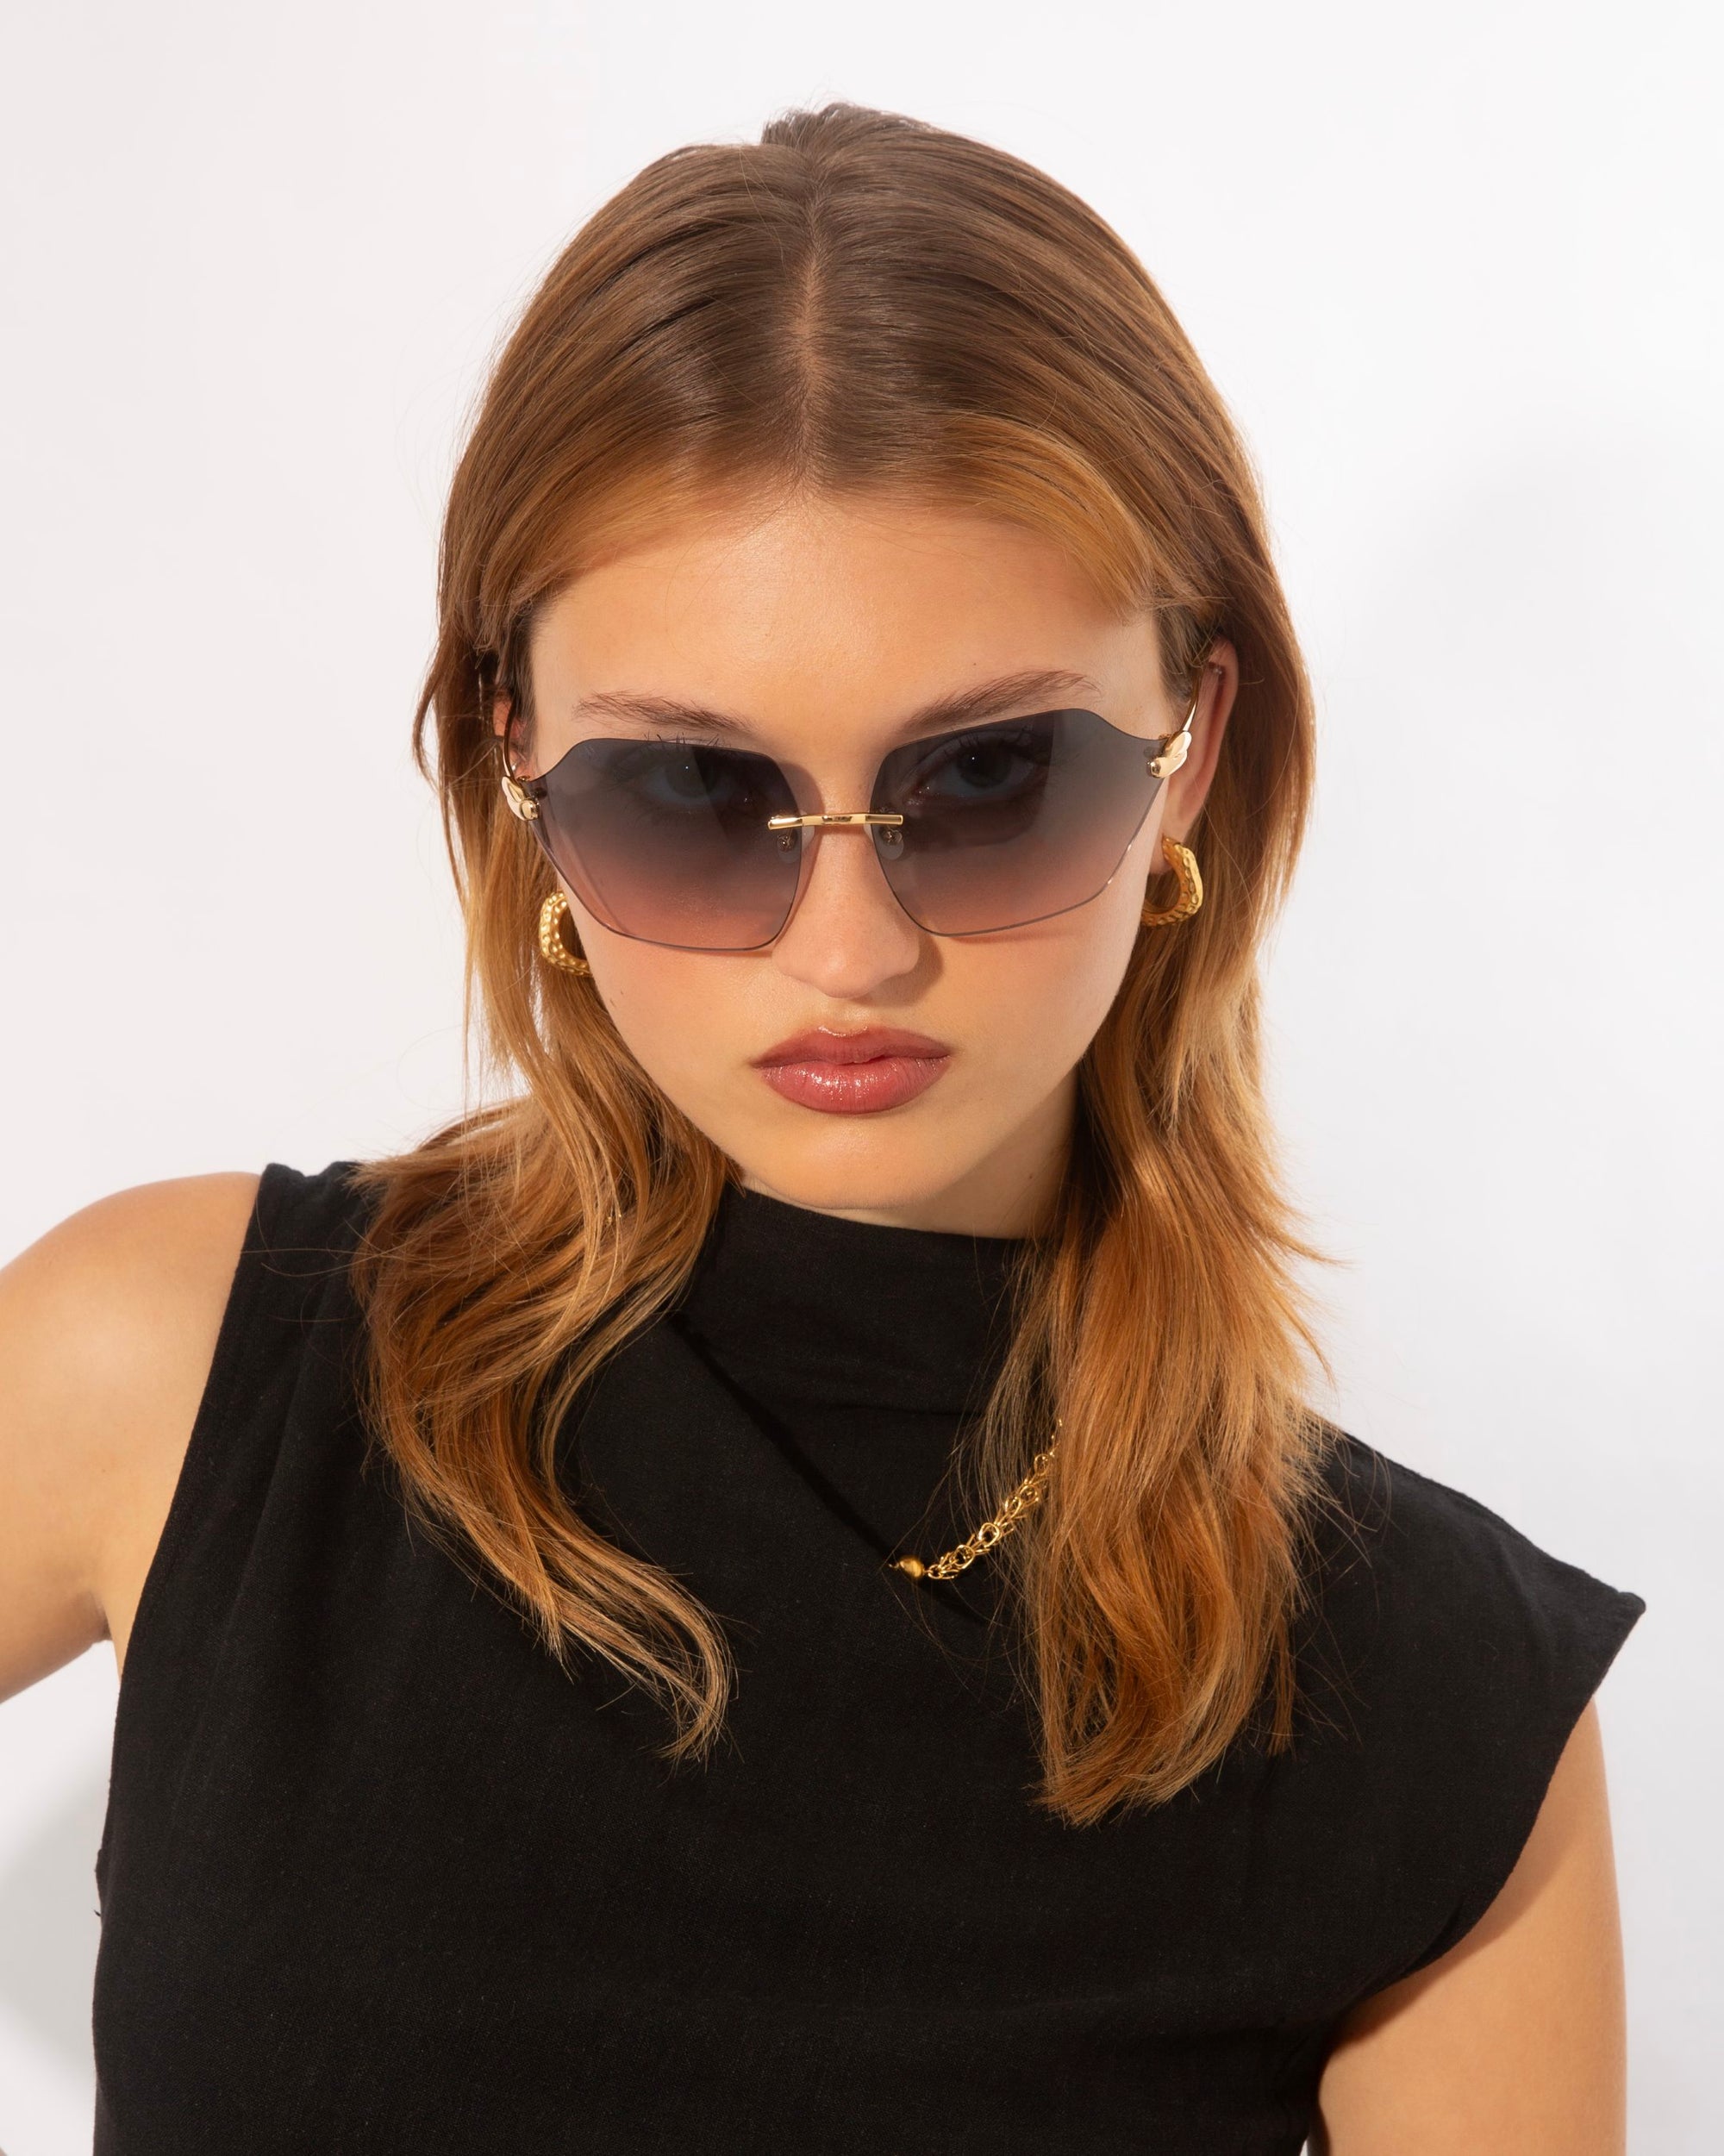 A person with light brown hair wearing large, dark sunglasses (Serpent II by For Art&#39;s Sake®) with frameless wrap lenses and gold earrings looks directly at the camera. They are dressed in a sleeveless black top against a plain white background.